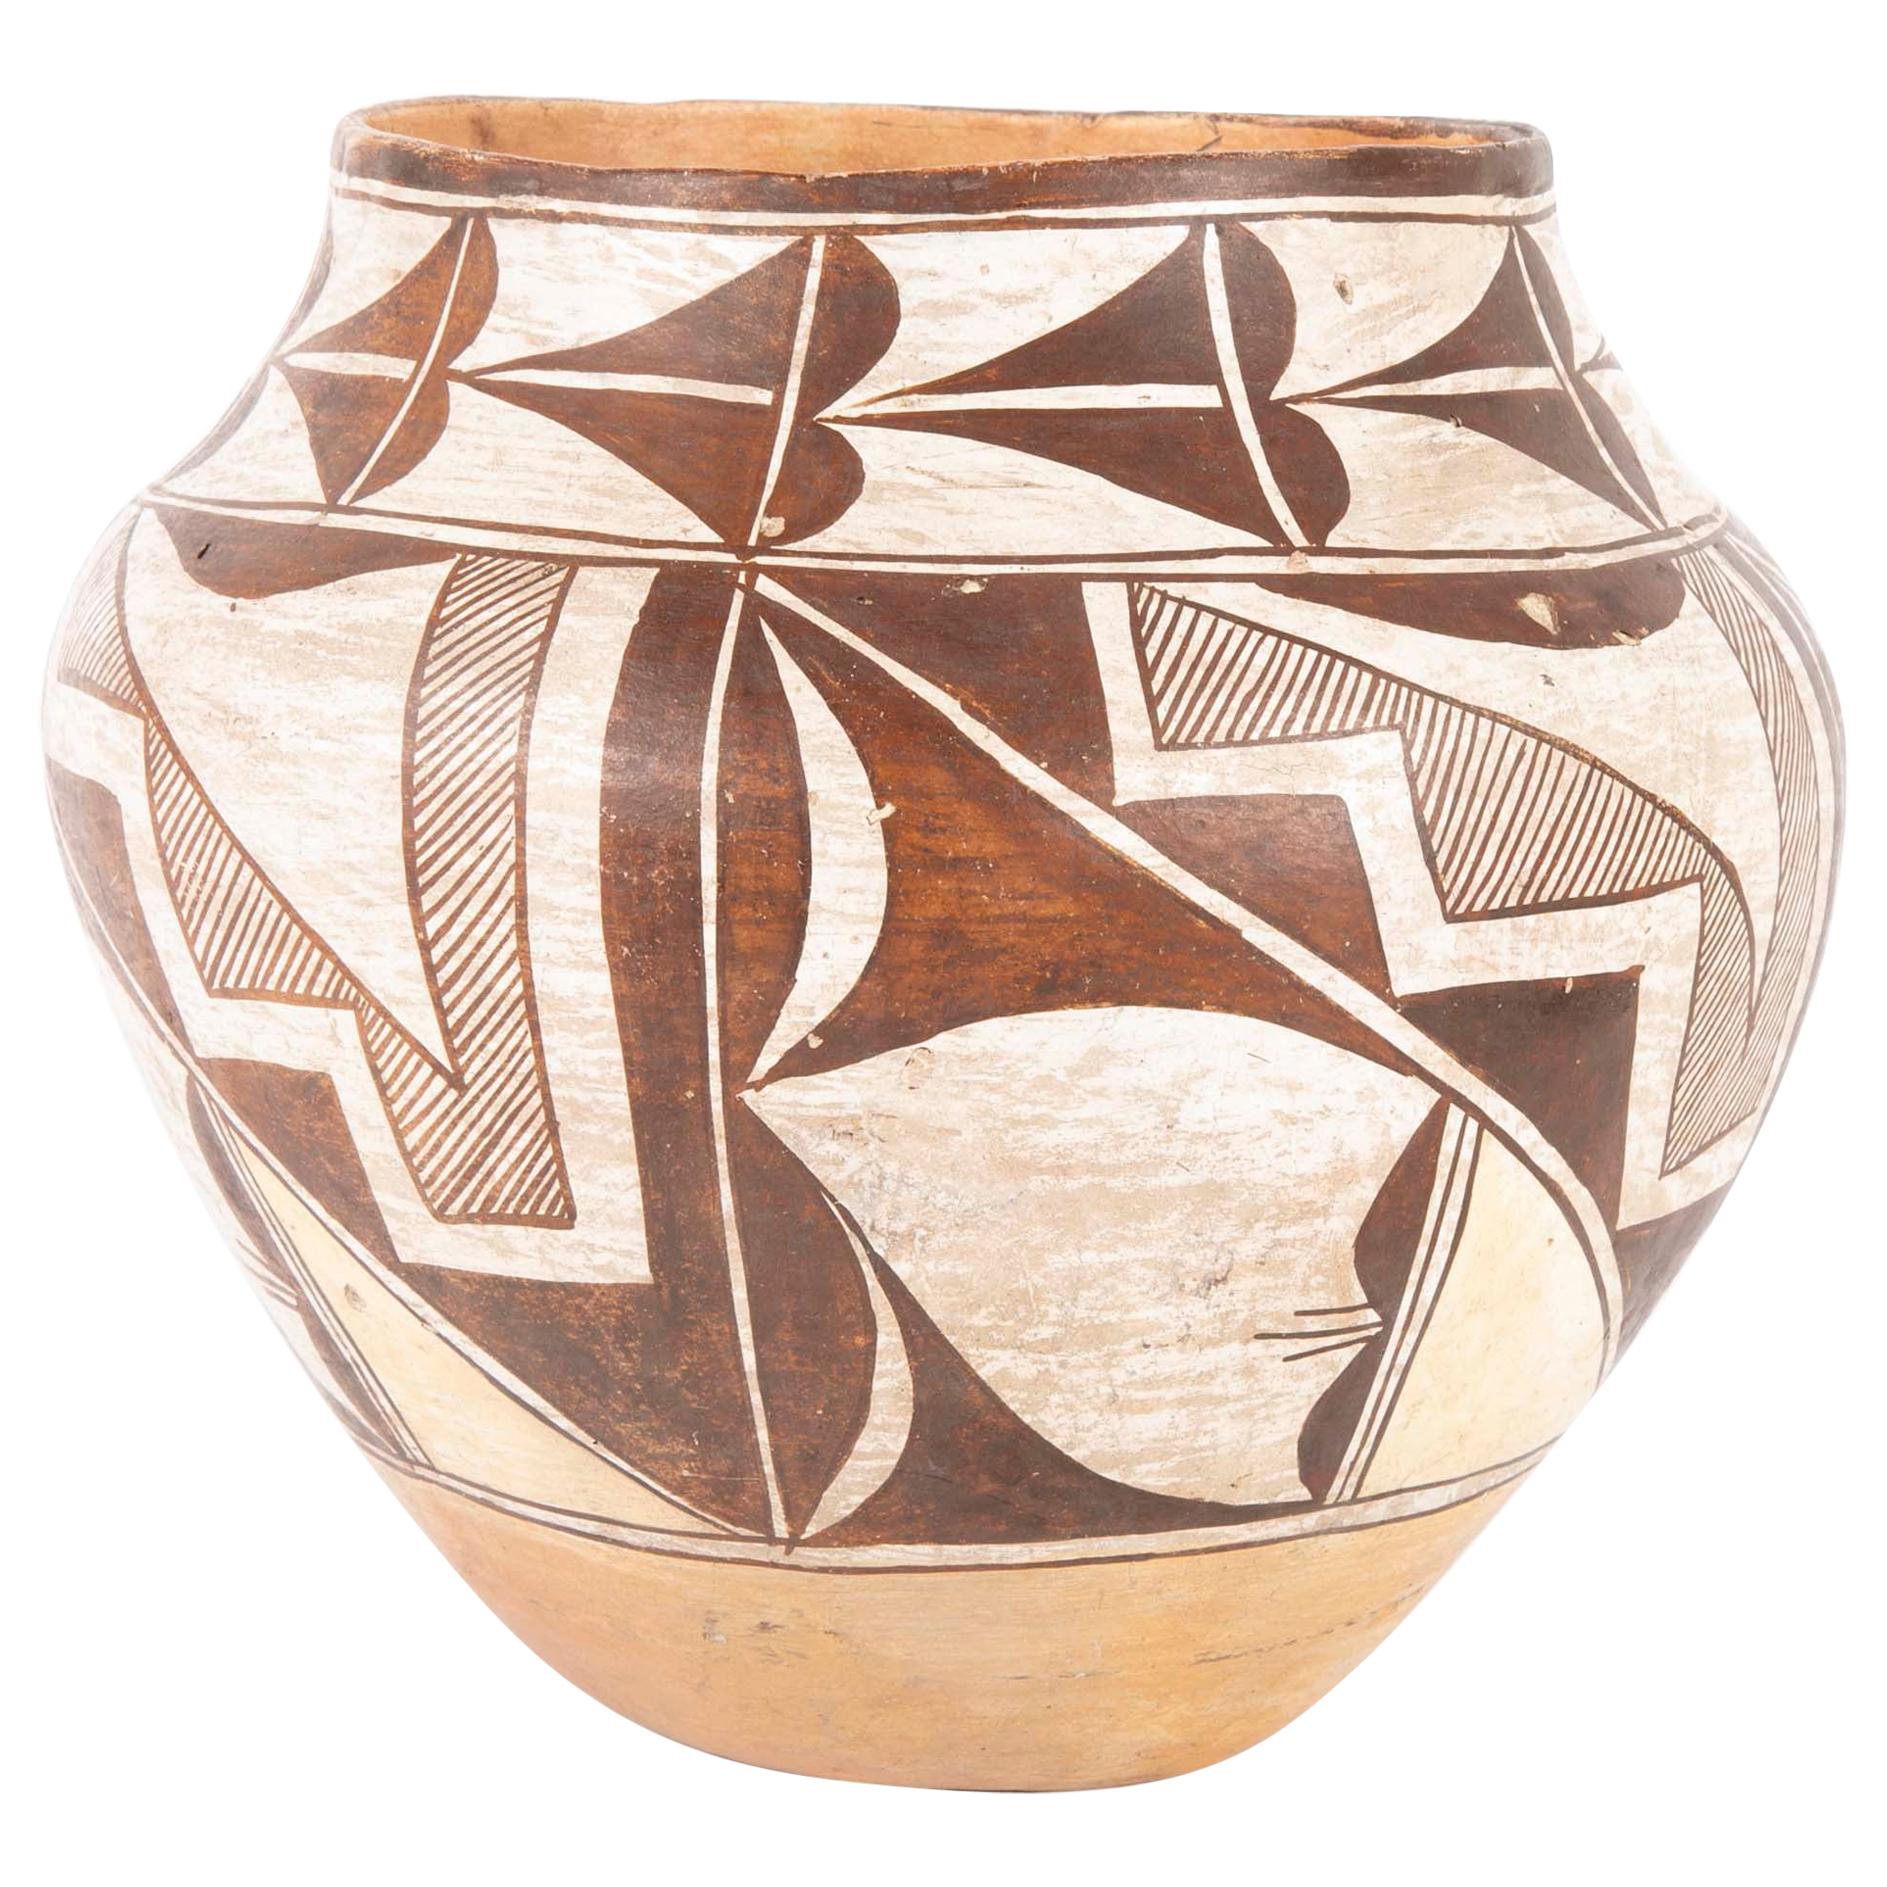 An Acoma Ceramic Vase from the Second Quarter of the 20th Century